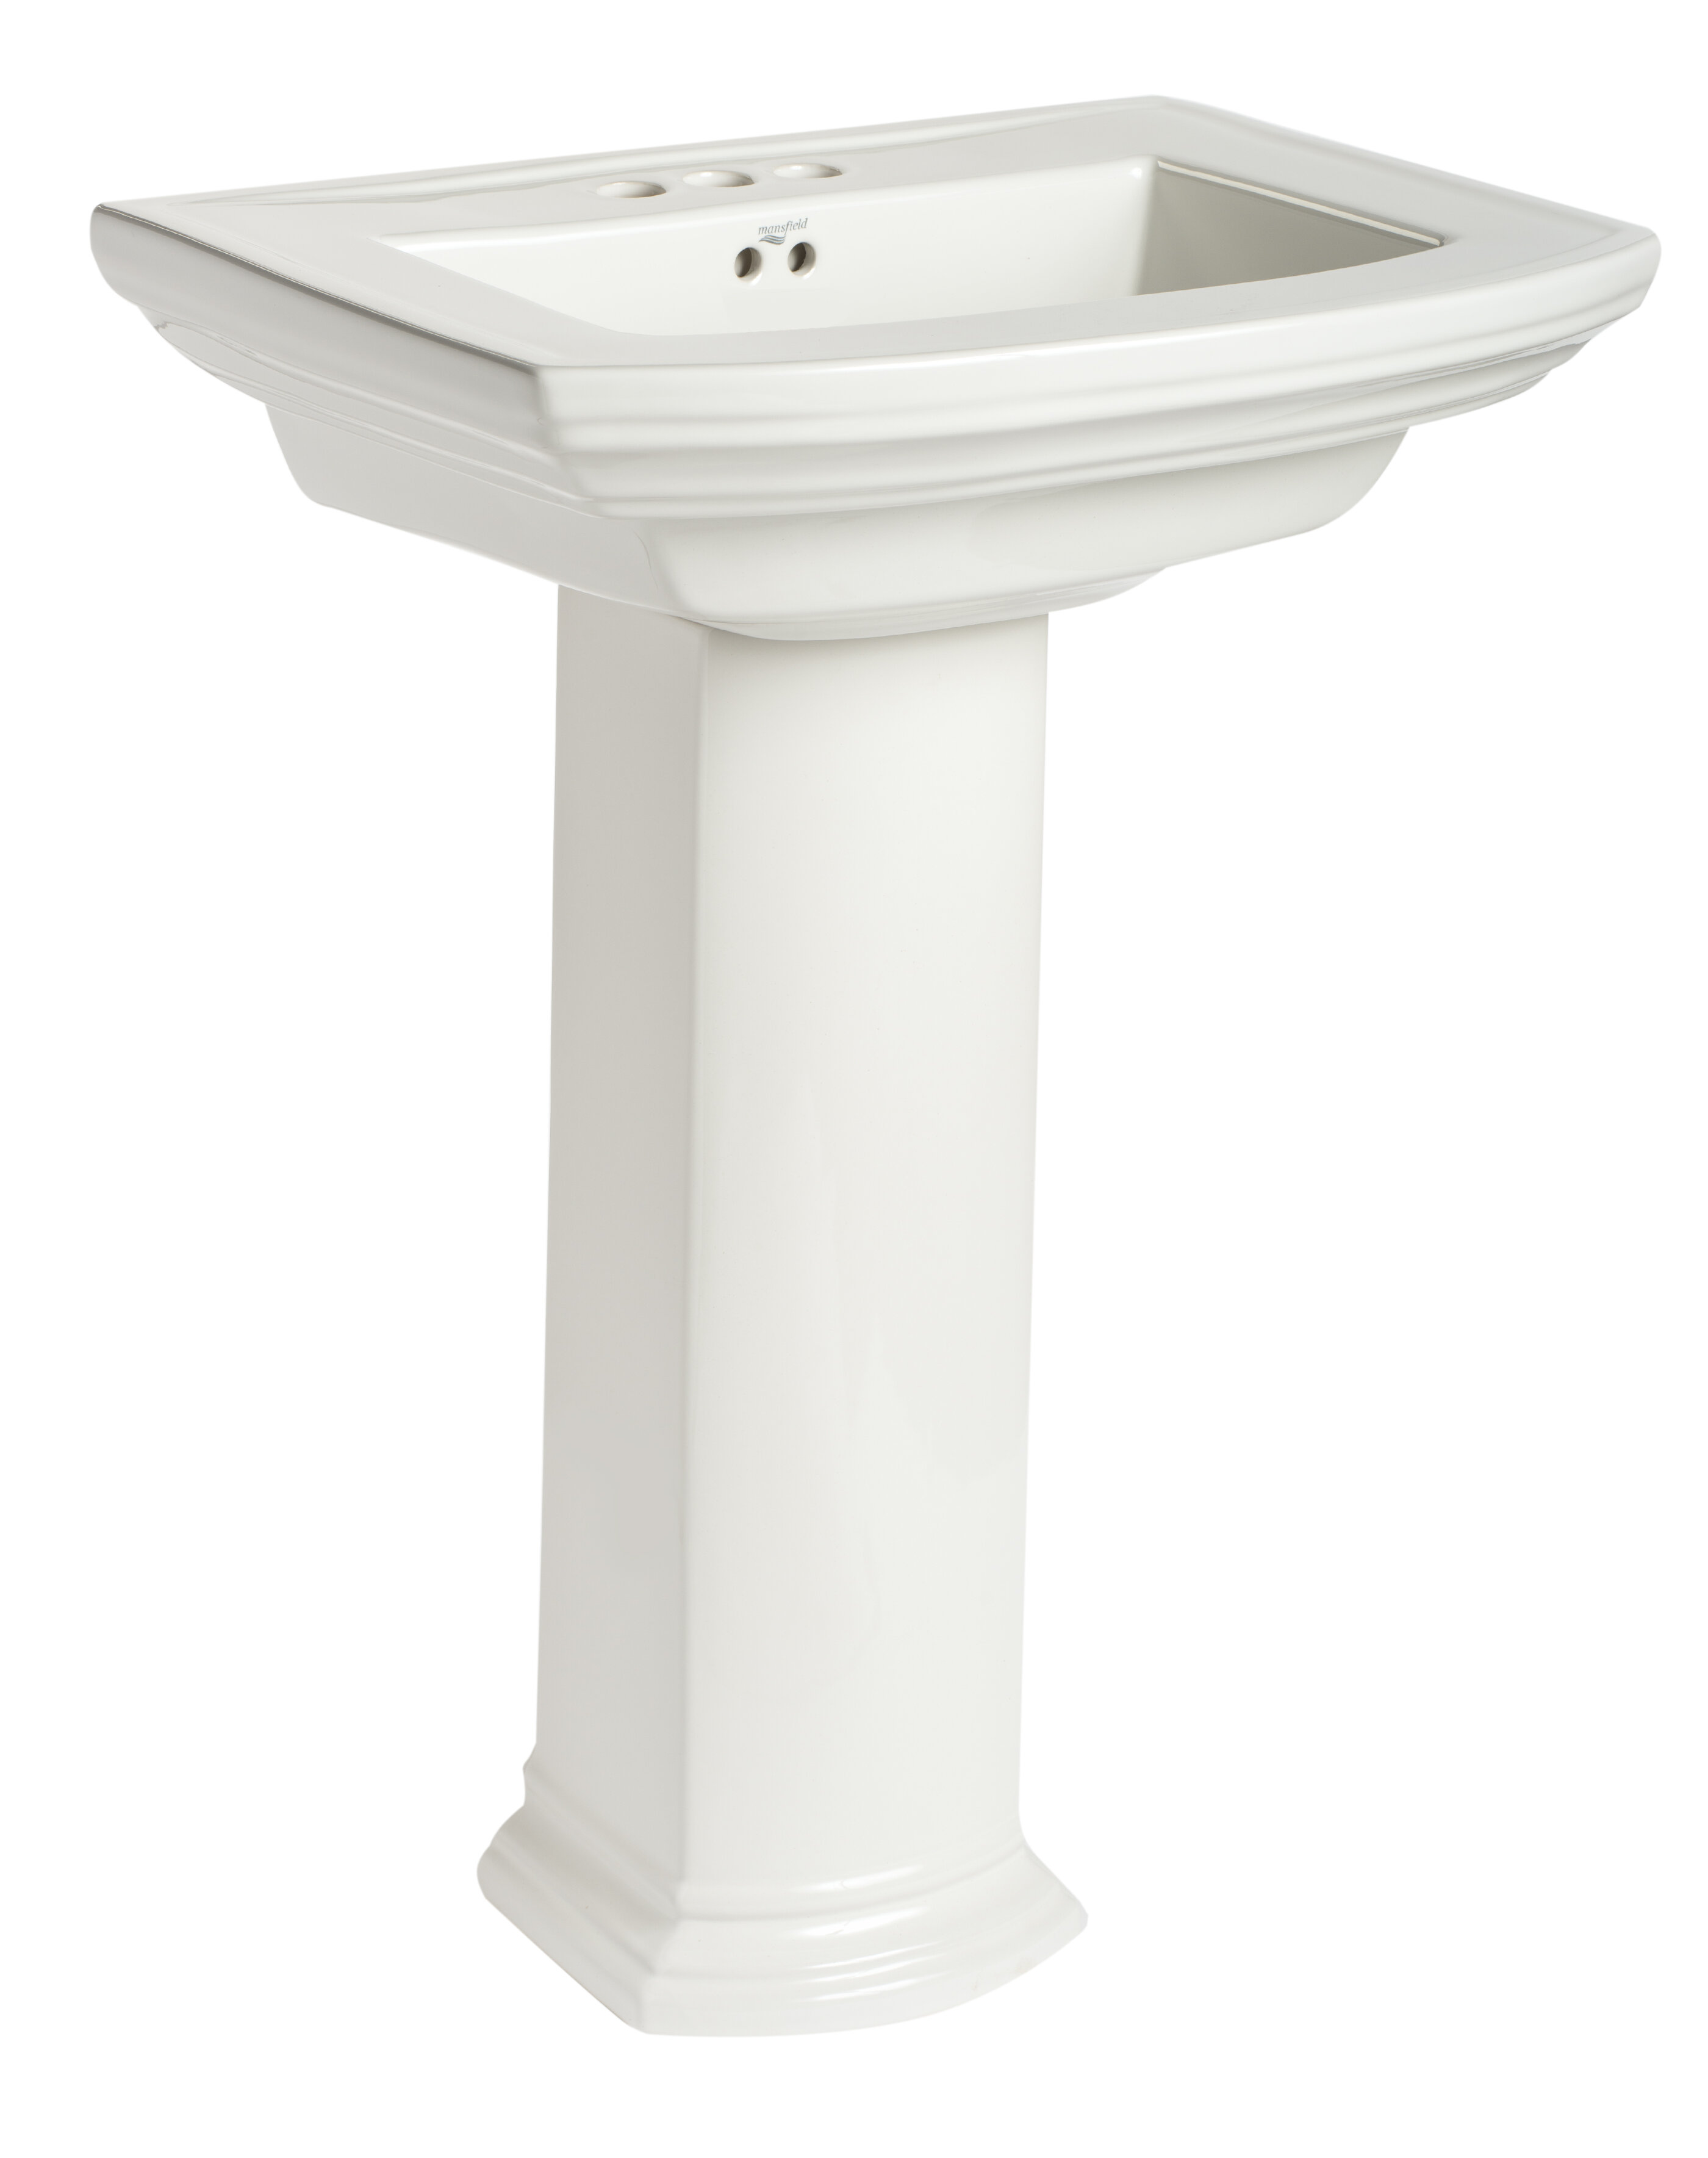 Mansfield Plumbing Products Bathroom Sinks Sale Up To 65